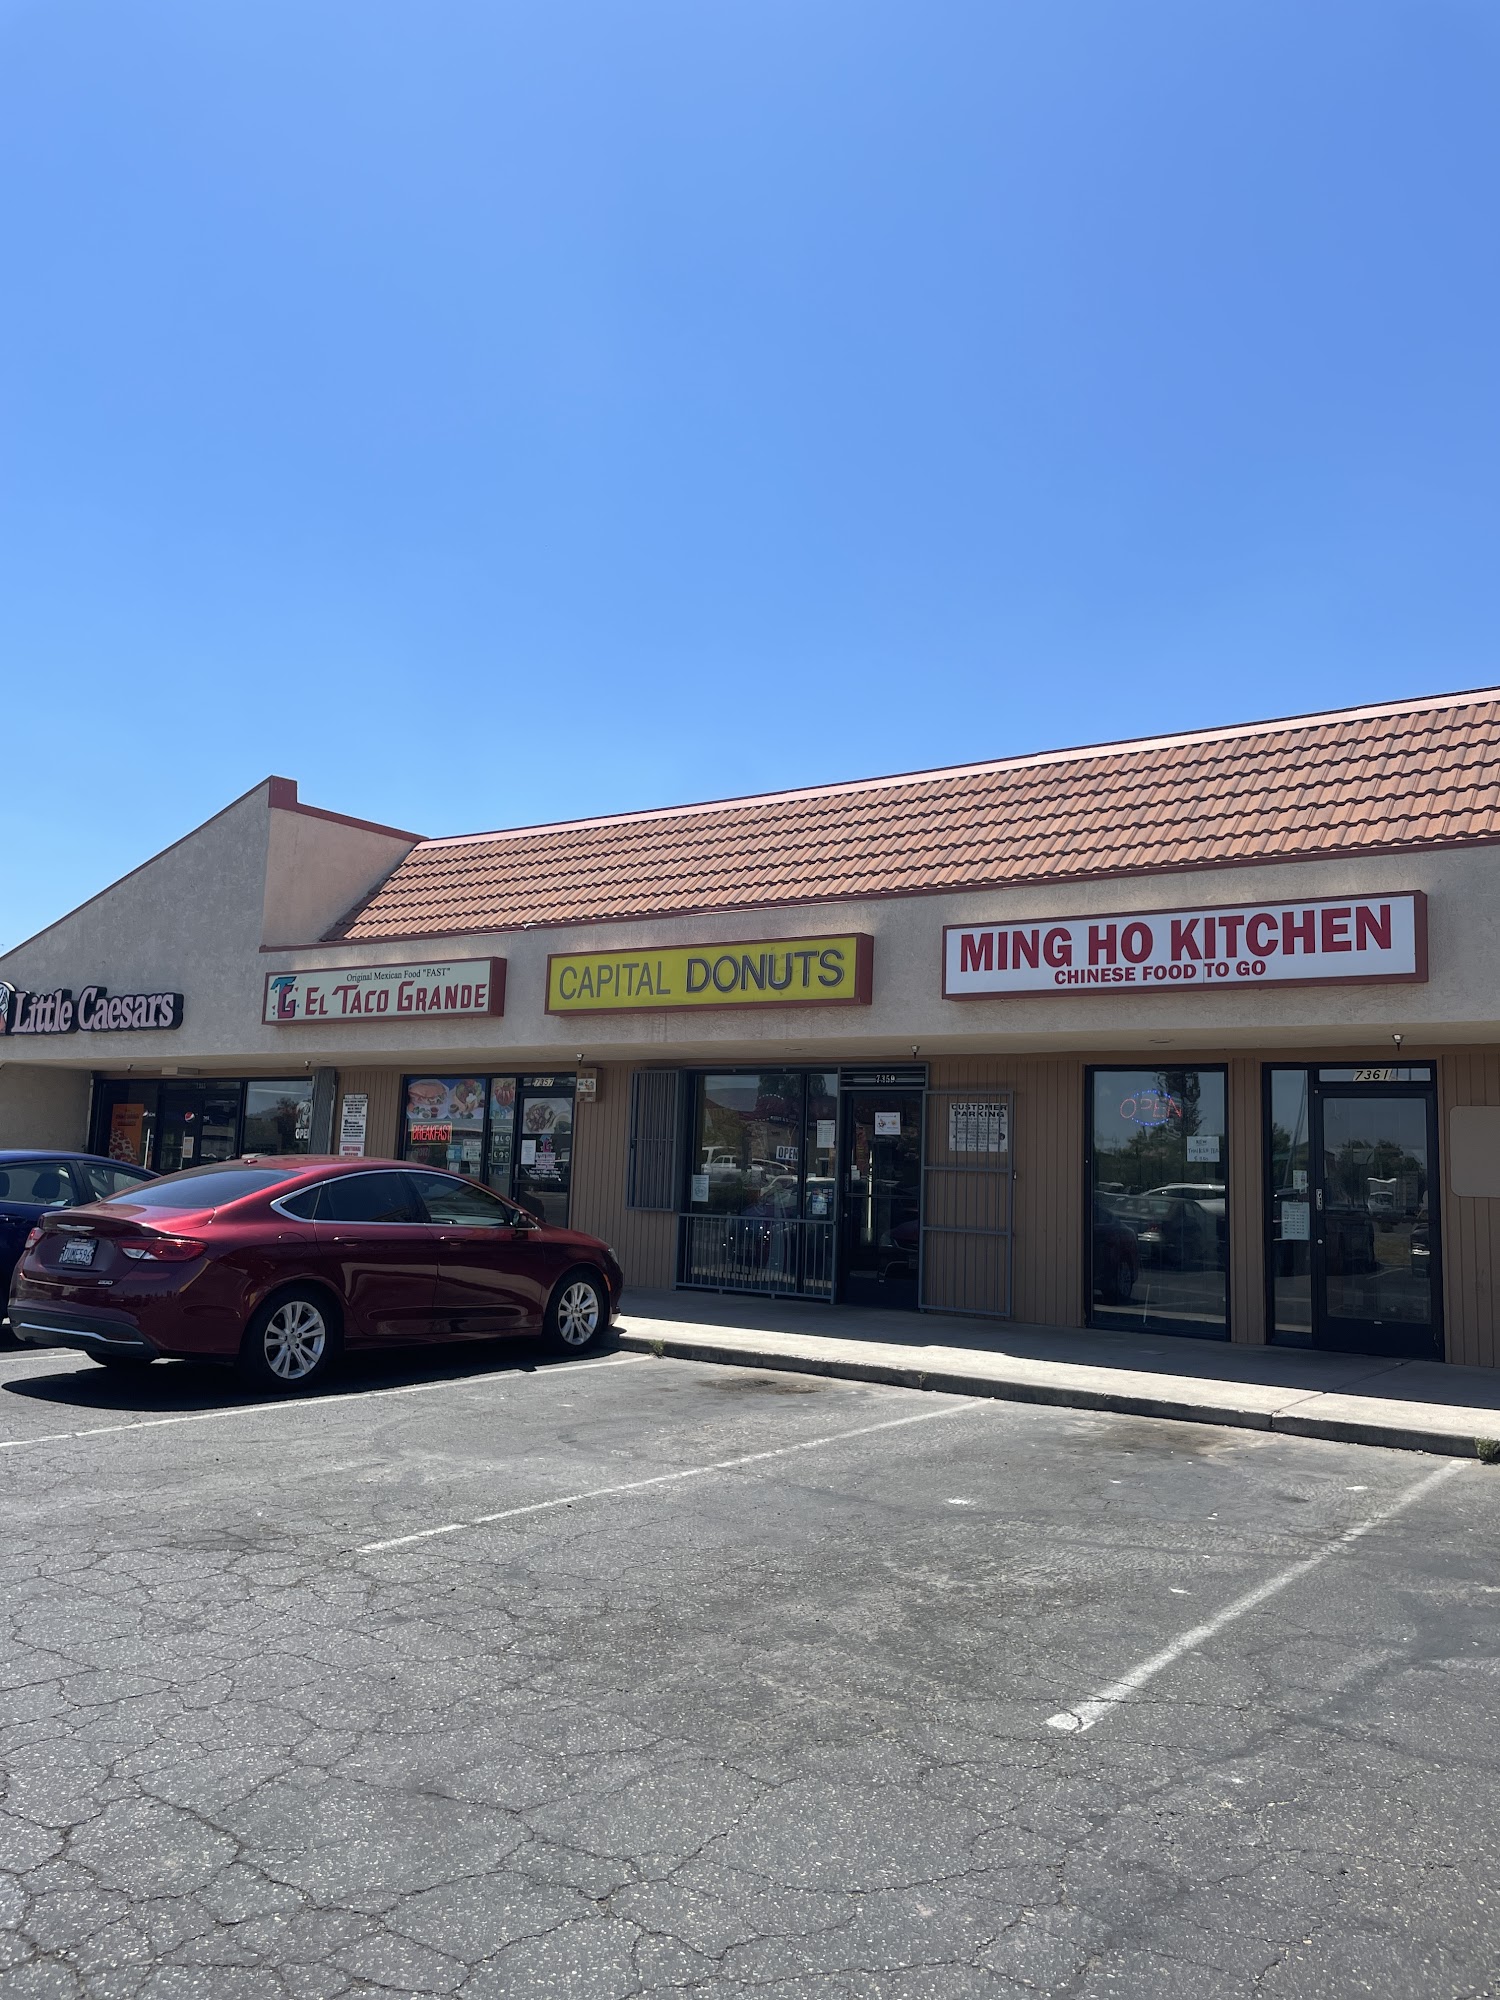 Ming Ho Kitchen Chinese Food to Go 7361 N Blackstone Ave, Pinedale, CA 93650